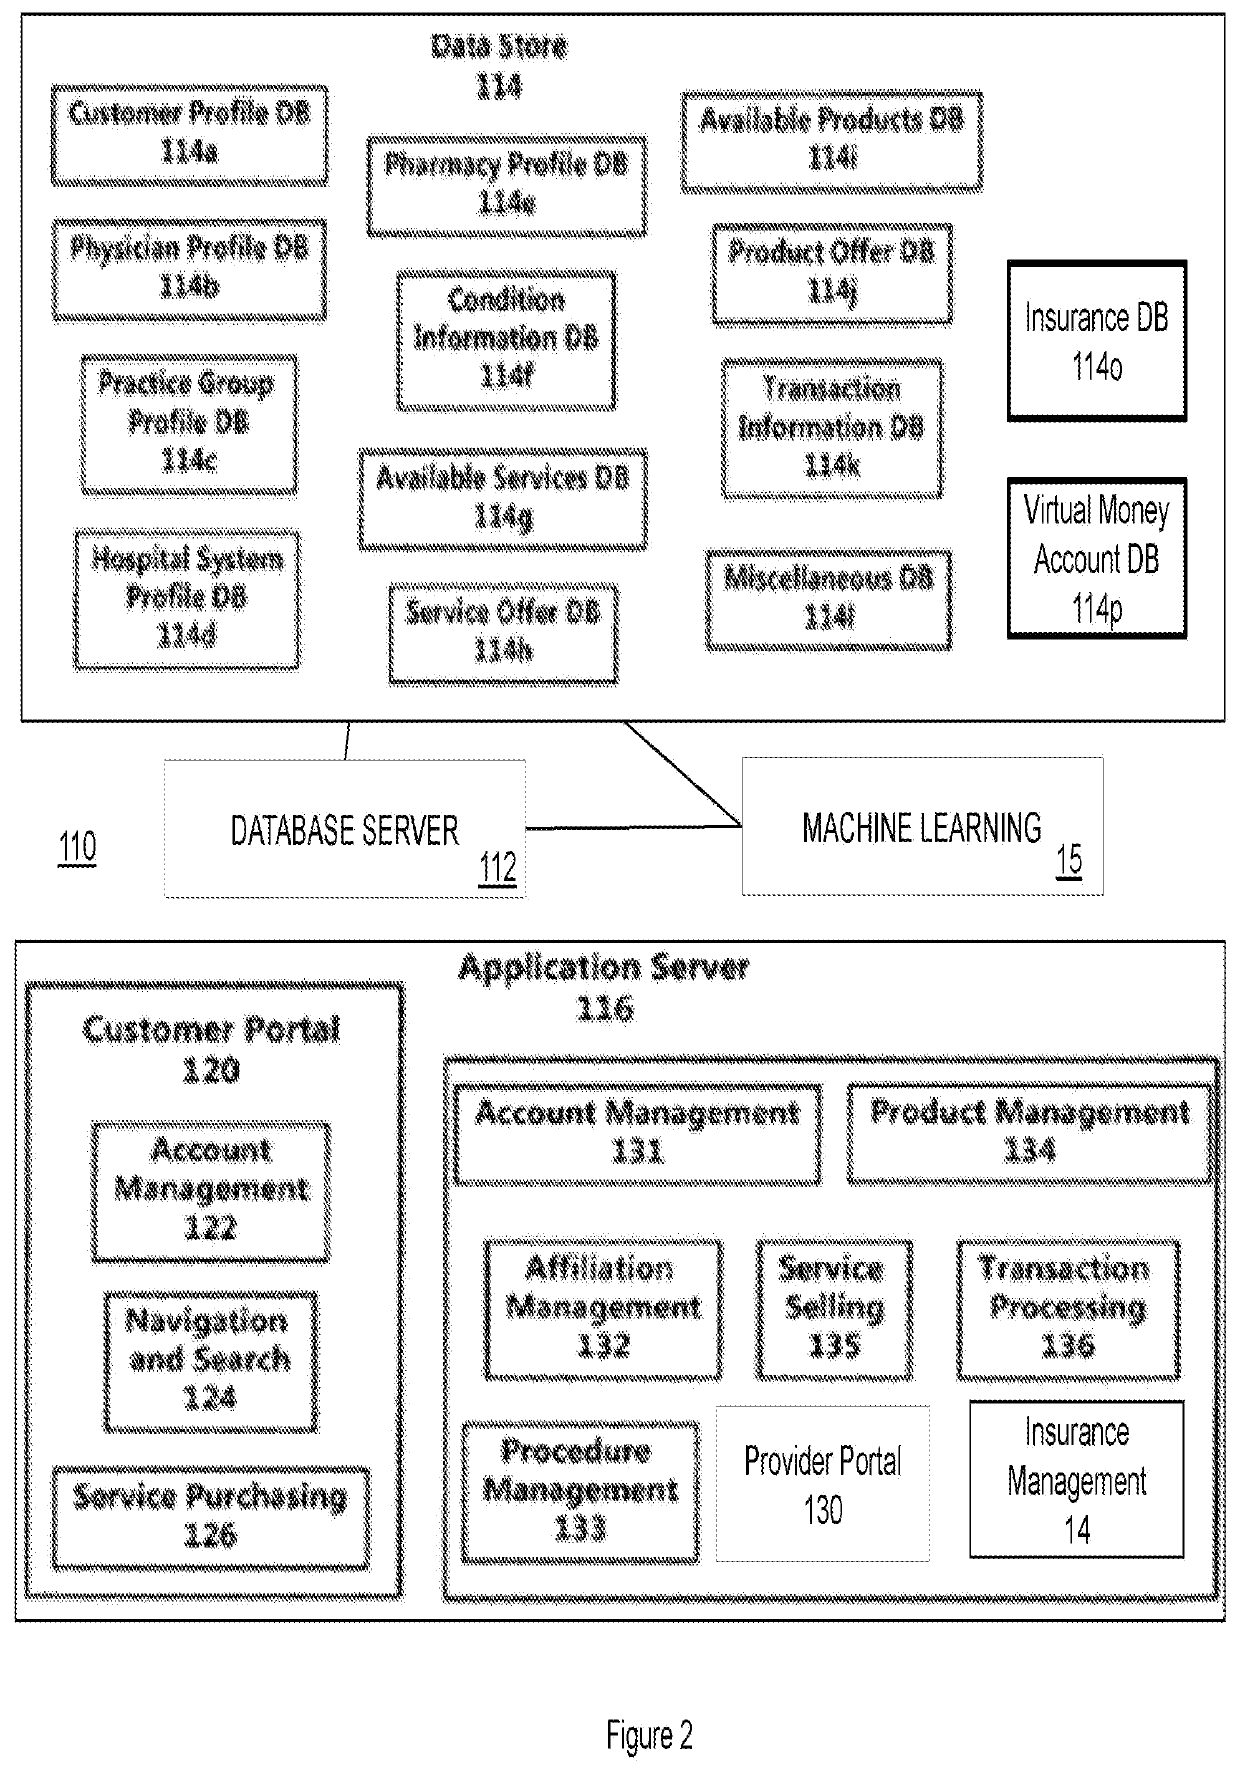 Network-based marketplace service pricing tool for facilitating purchases of bundled services and products